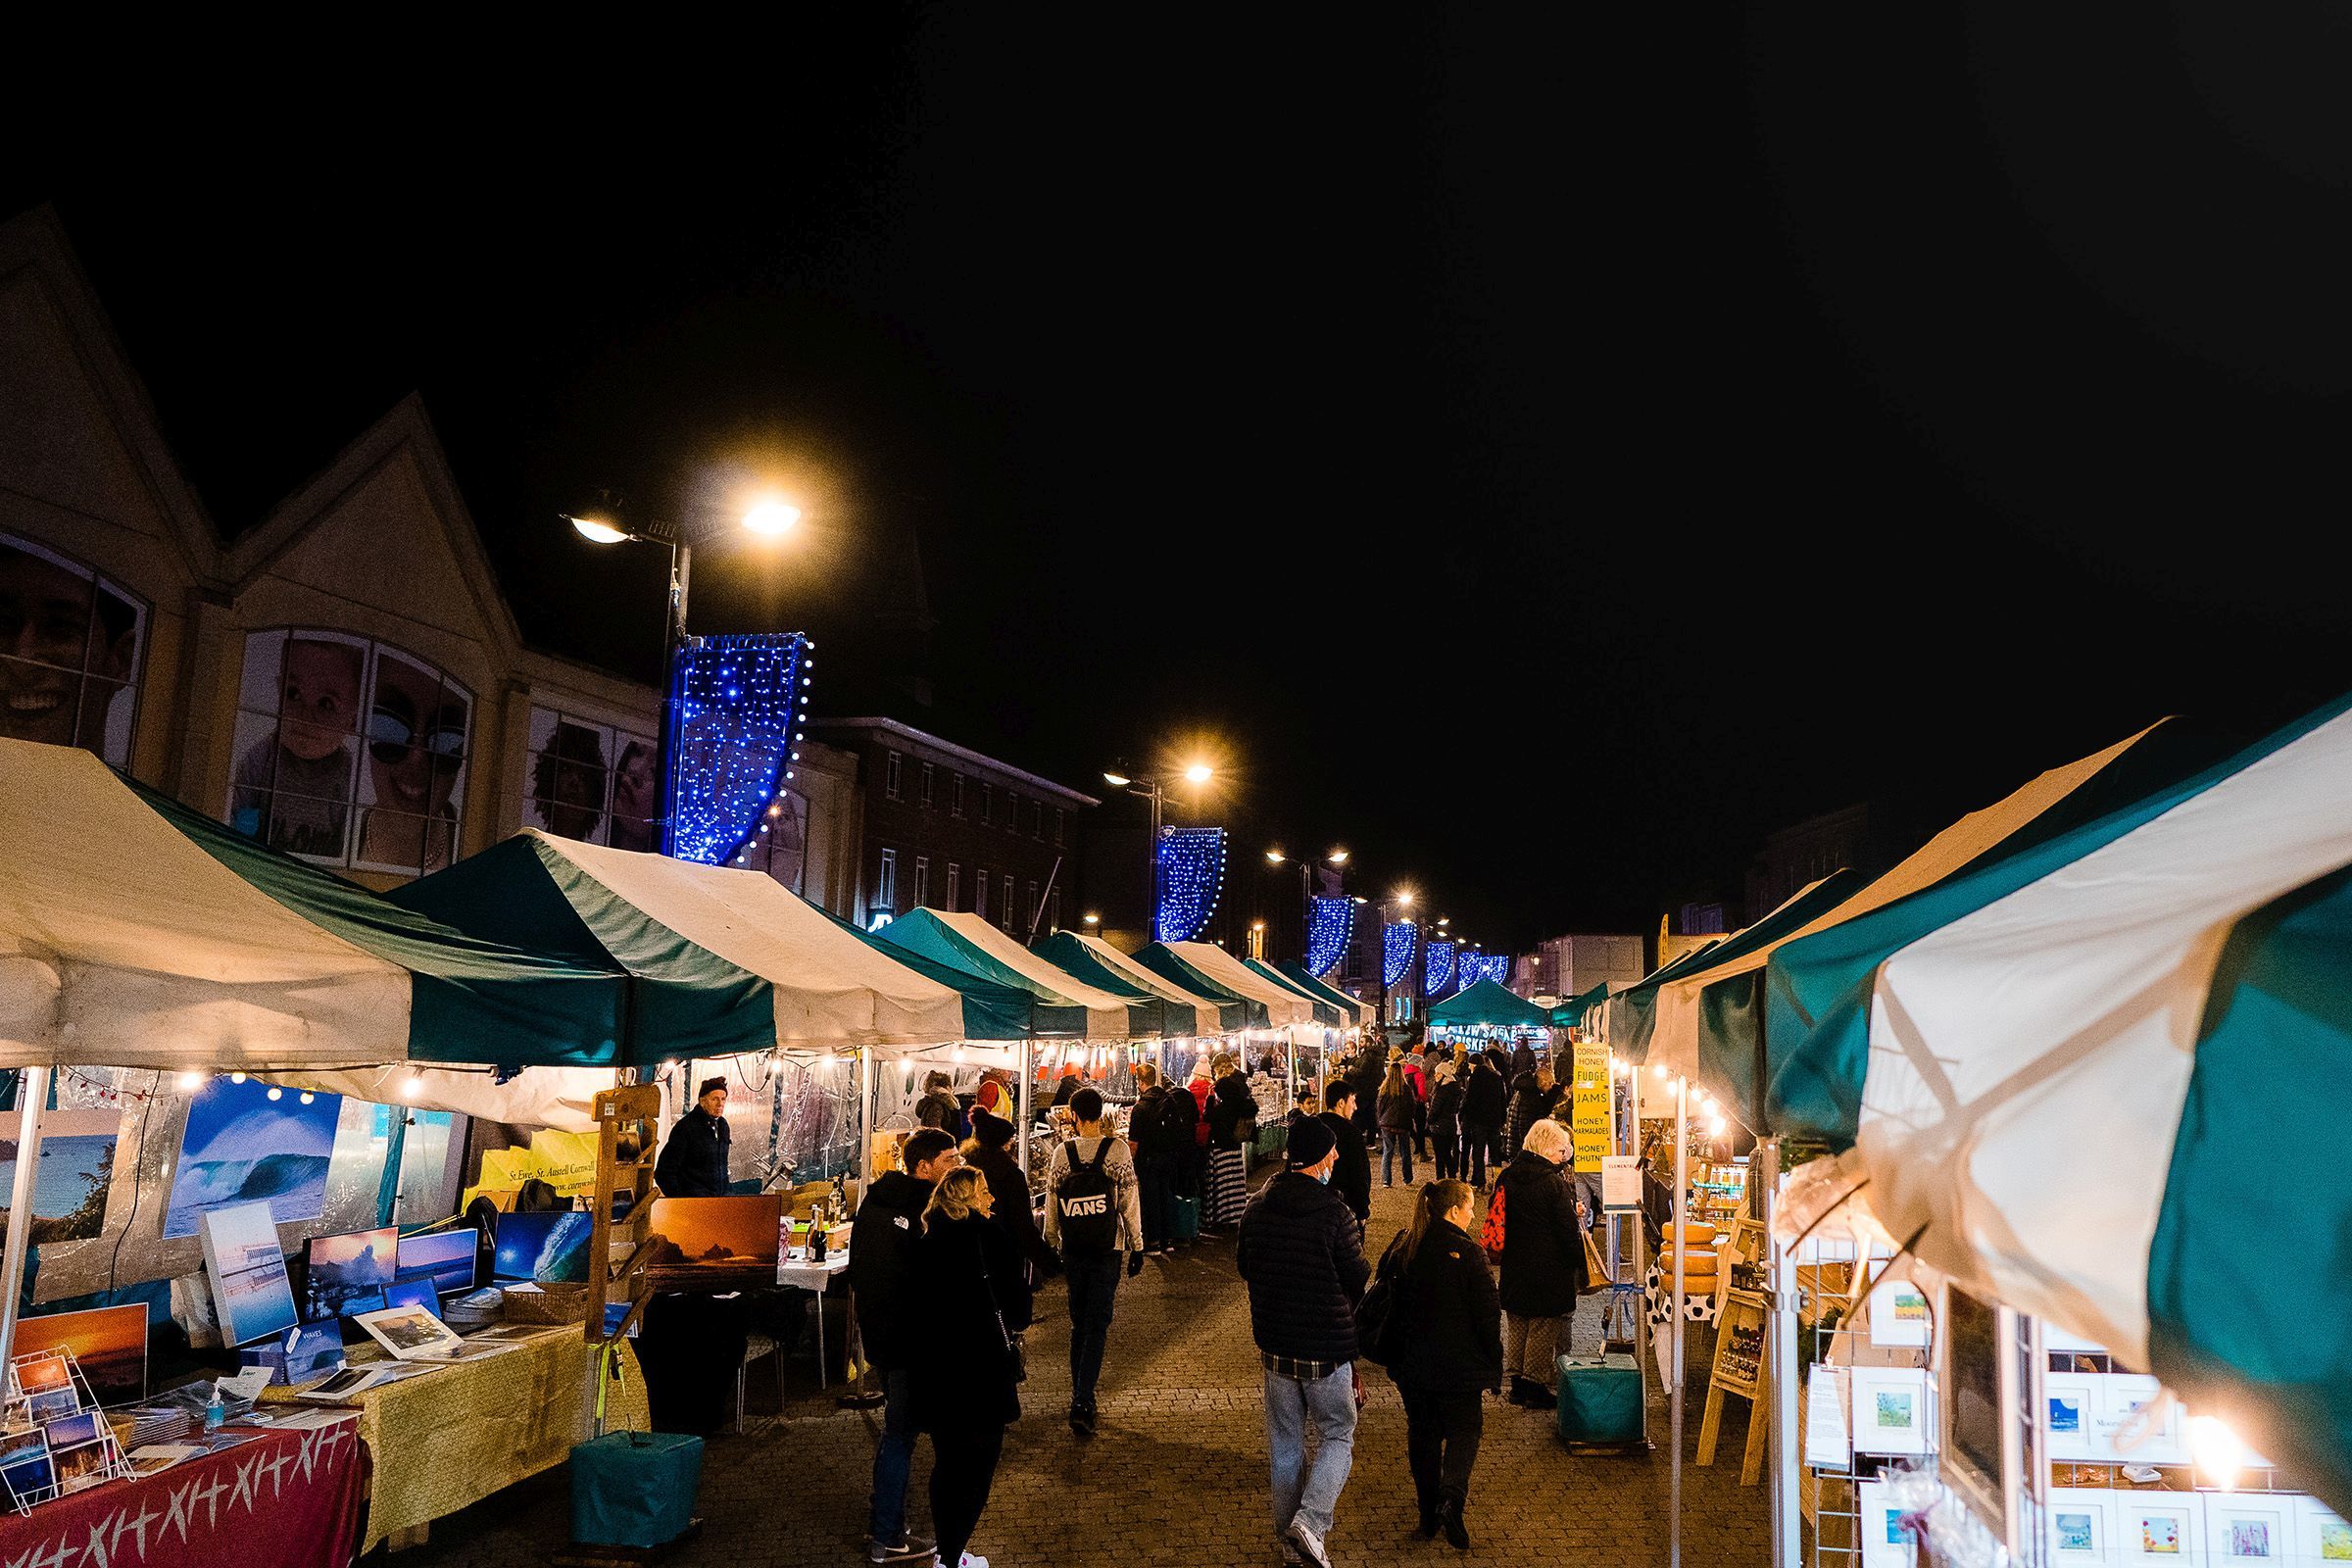 Truro Farmers Market will be joining the late night shopping events Picture: Stewart Girvan